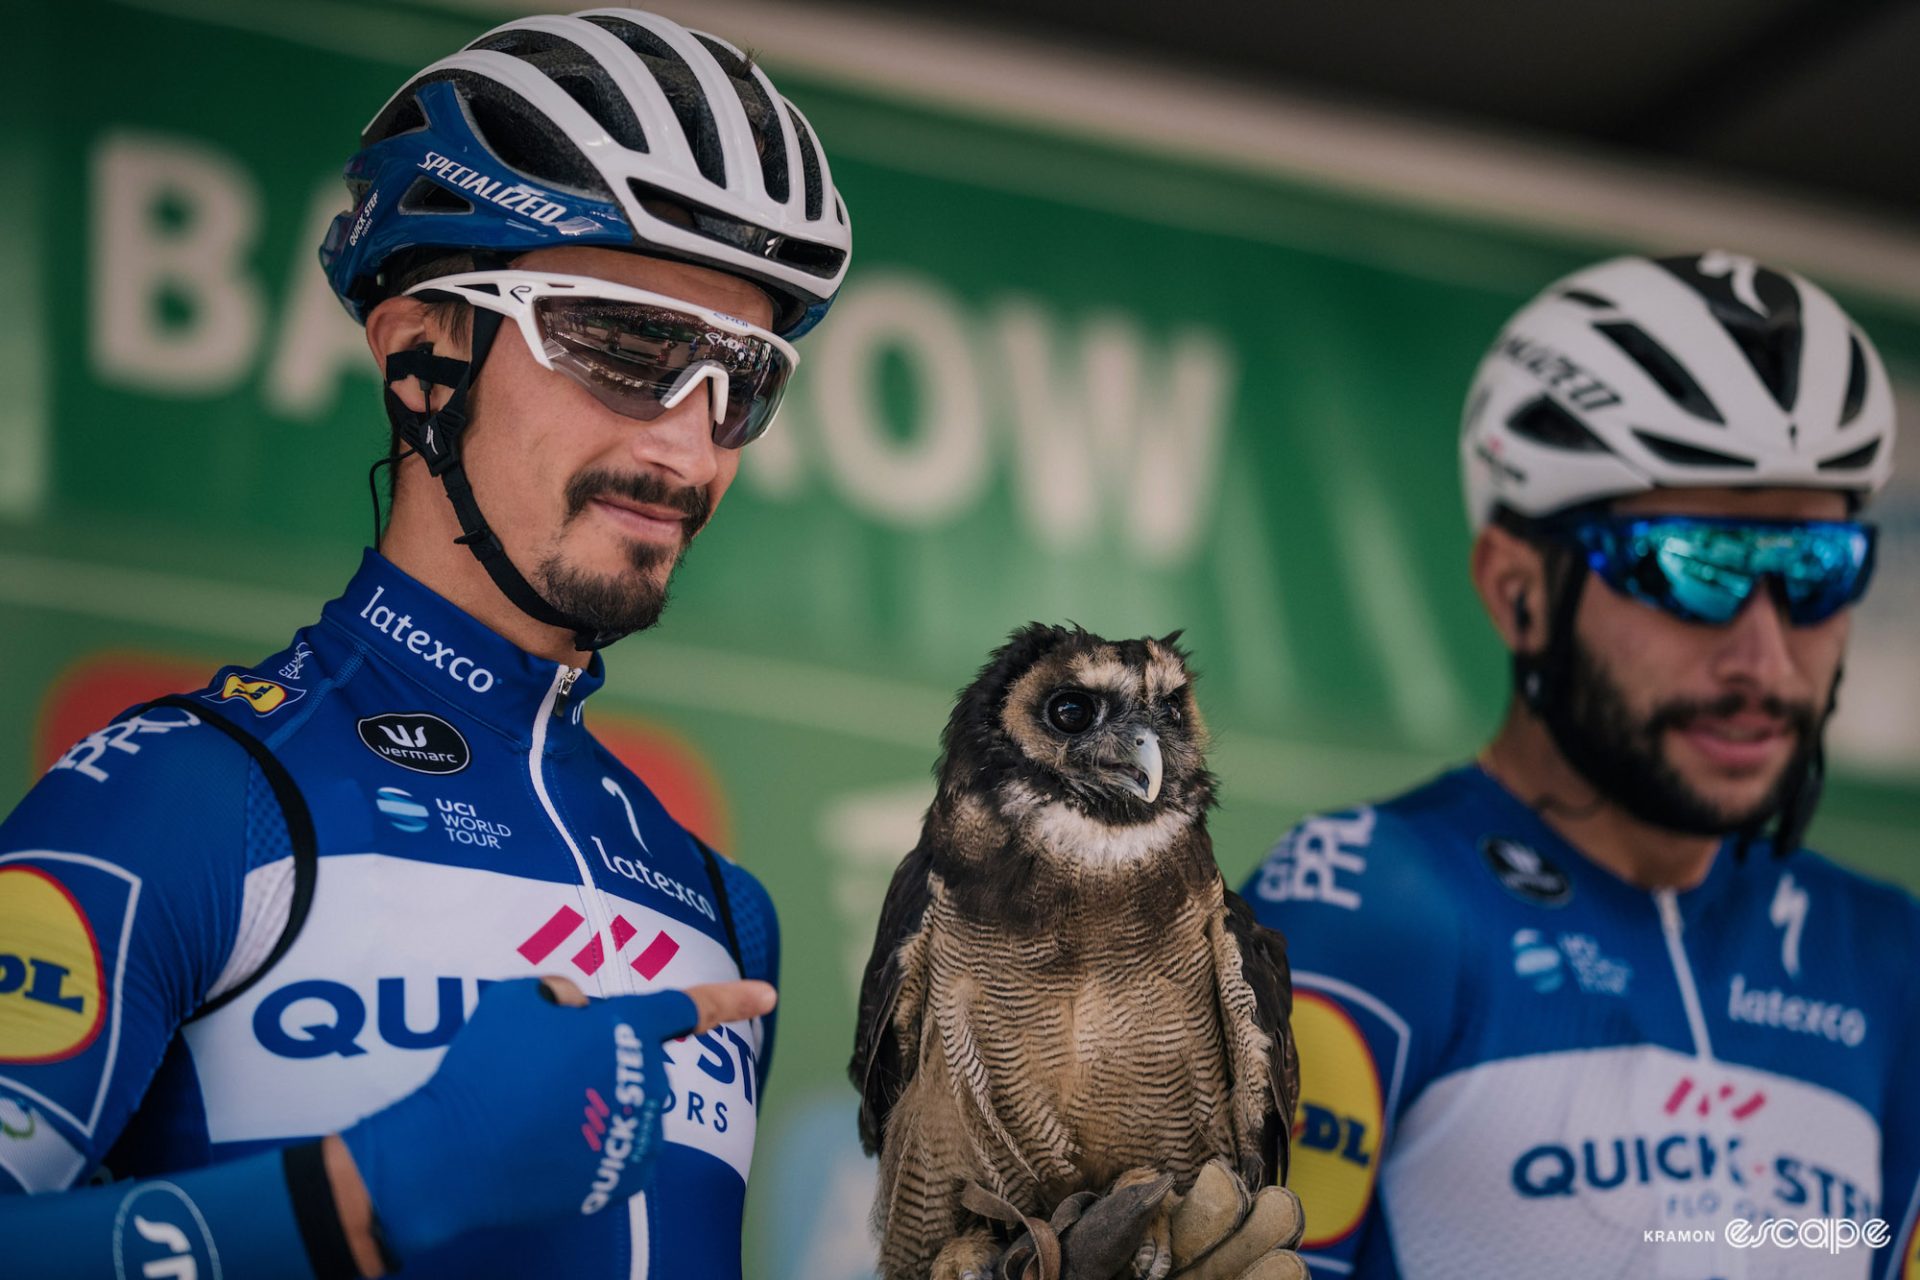 Julian Alaphilippe on a stage at the 2018 Tour of Britain holding a falcon and looking both pleased and a little bit nervous. He is pointing at it with his other hand. The bird looks nonplussed. 